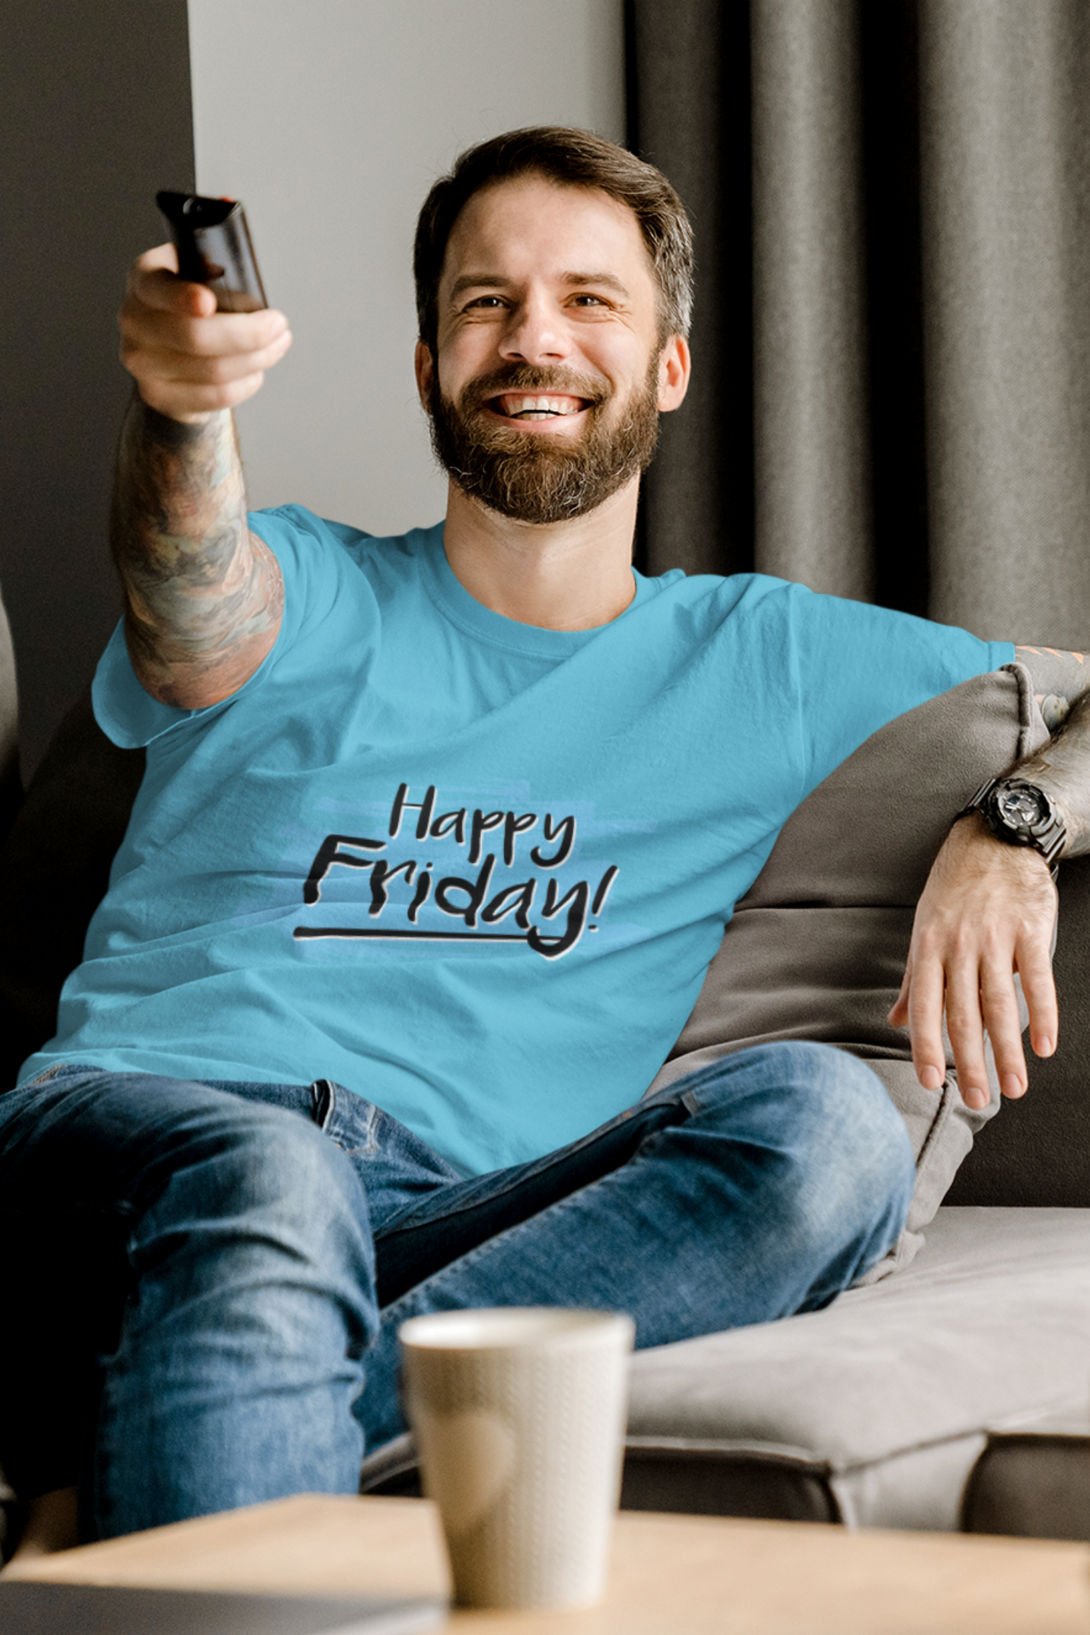 Happy Friday Printed T-Shirt For Men - WowWaves